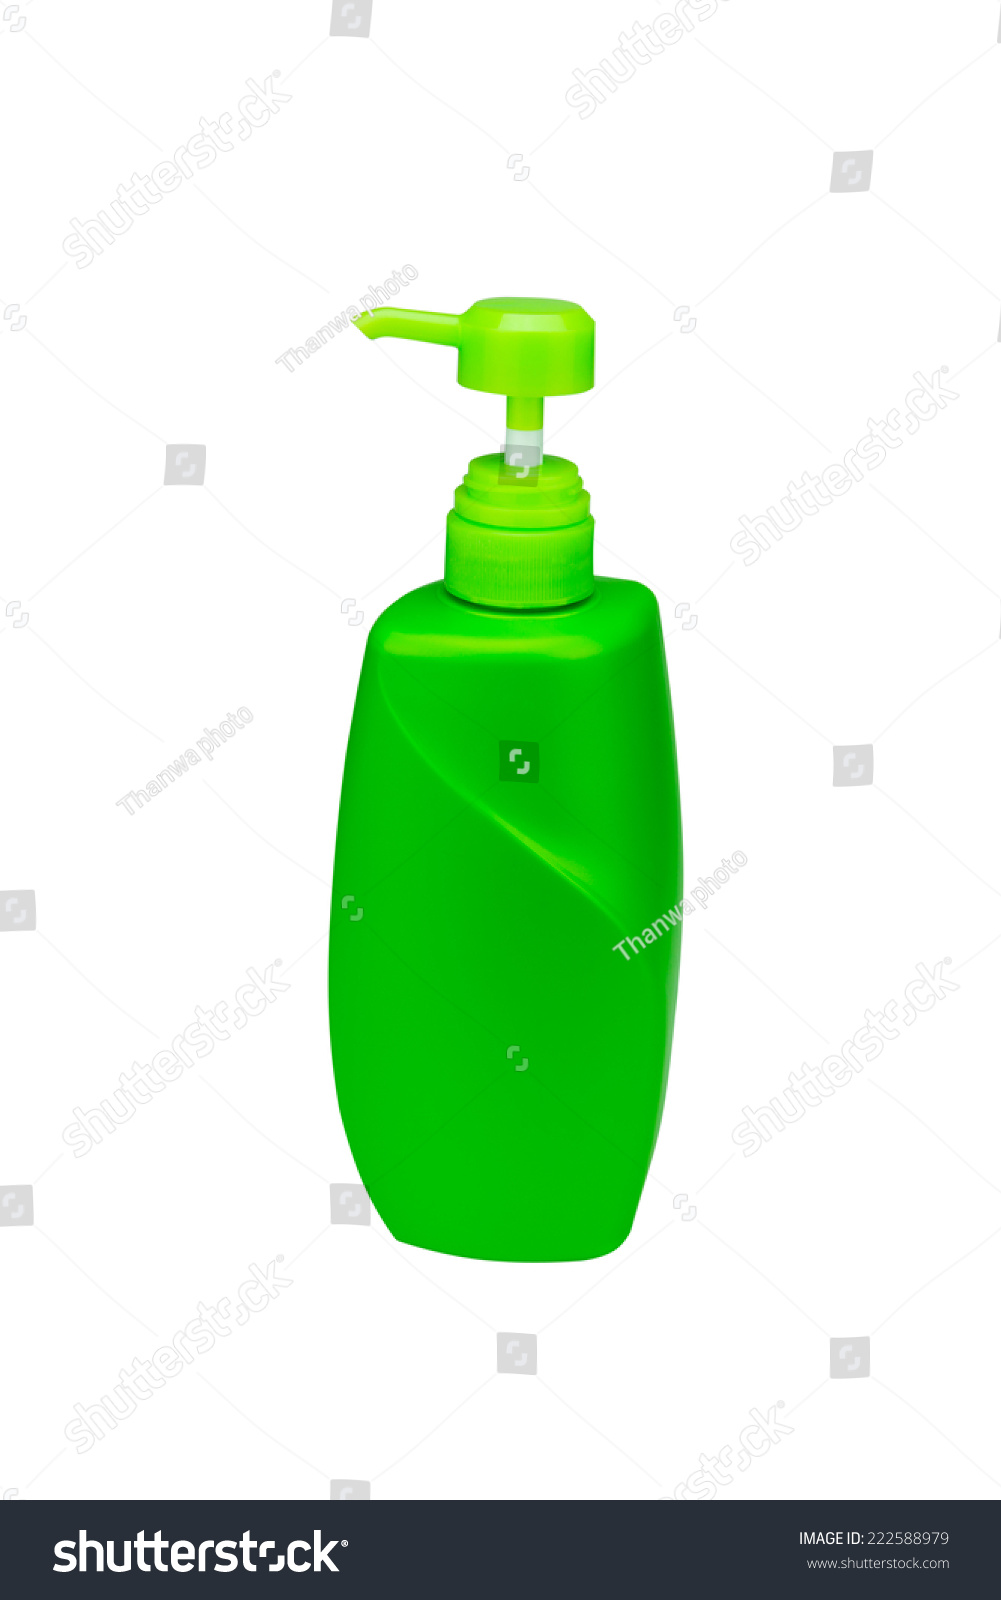 Download Yellow Green Pump Bottle Isolated On Stock Photo Edit Now 222588979 Yellowimages Mockups